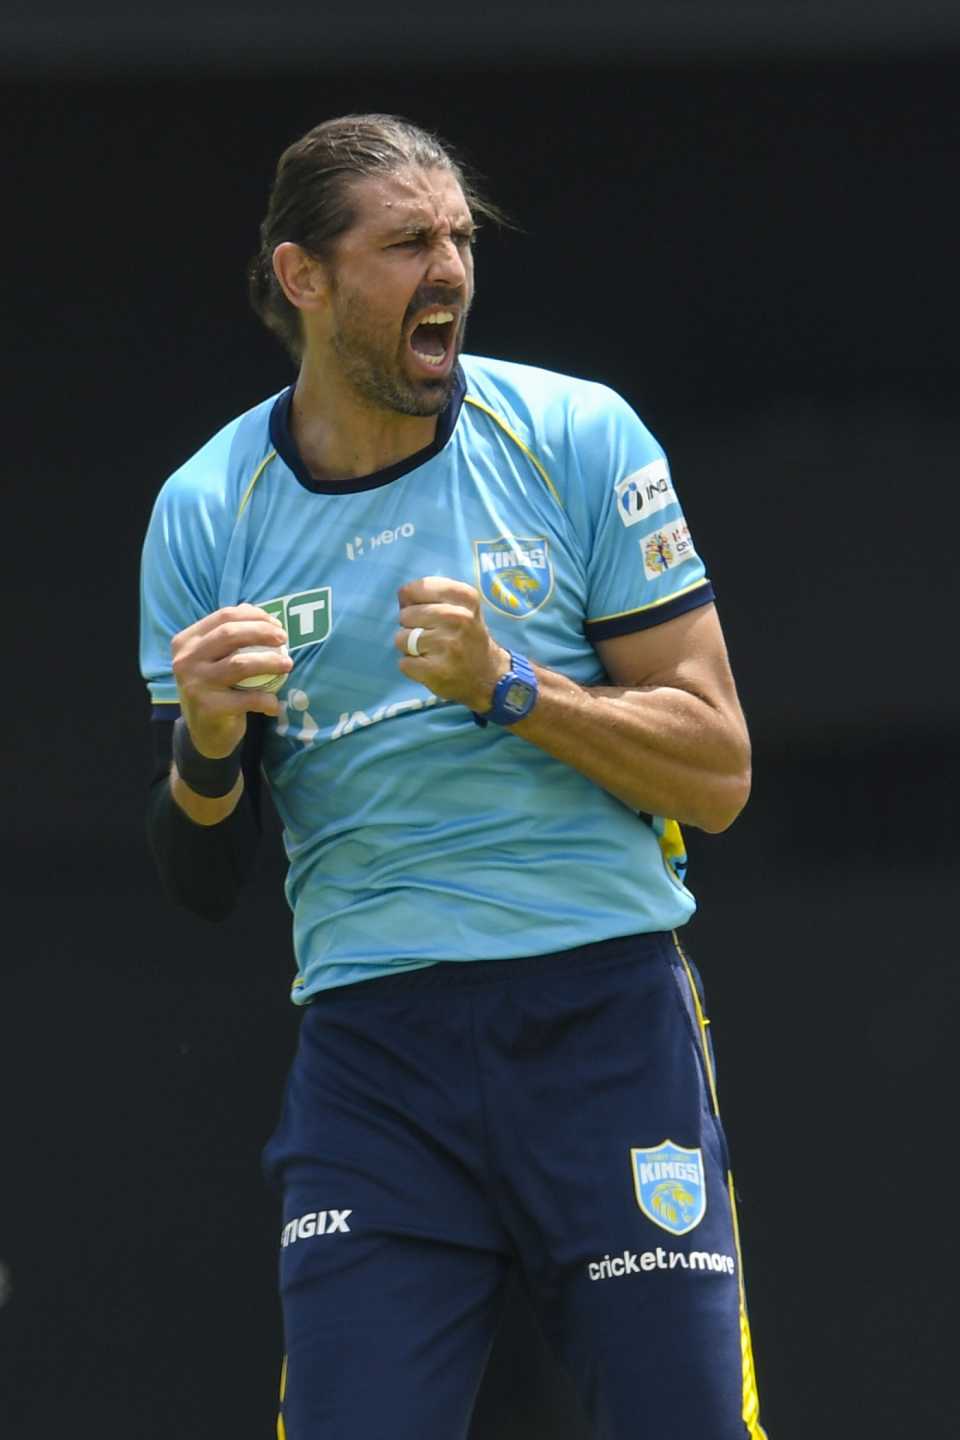 David Wiese took three wickets in one over, Barbados Royals vs St Lucia Kings, CPL 2021, Basseterre, September 11, 2021